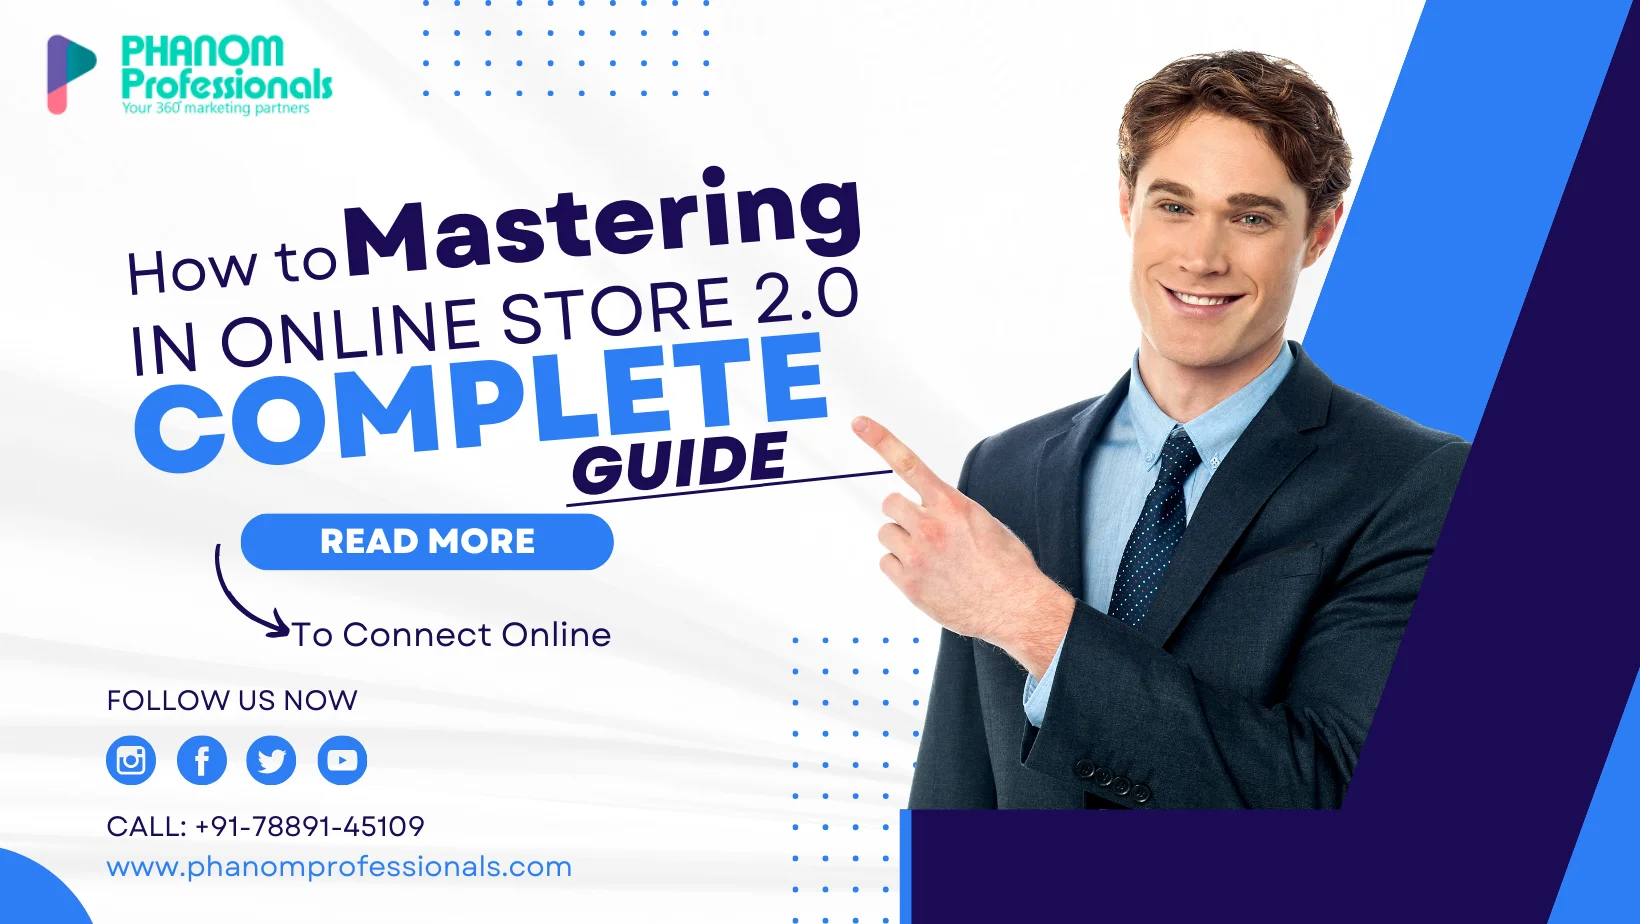 mastring in online store 2.0
hire best shopify developer in india. 